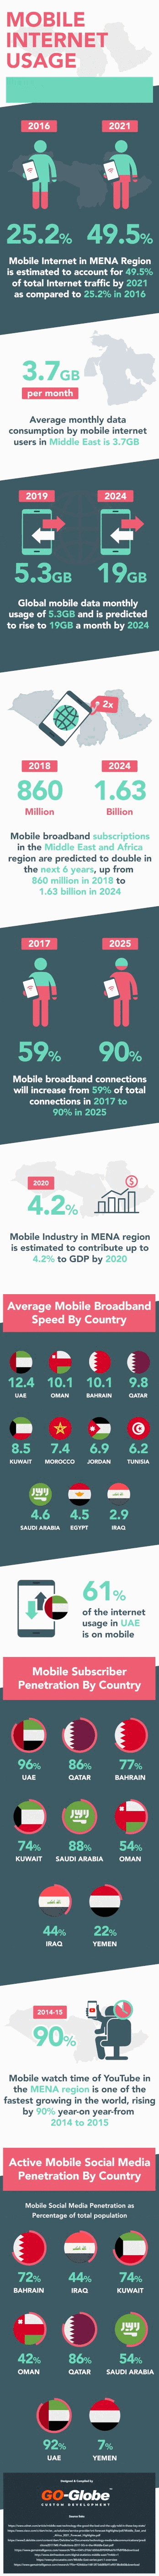 Mobile Internet Usage In Middle East – Statistics and Trends [Infographic]